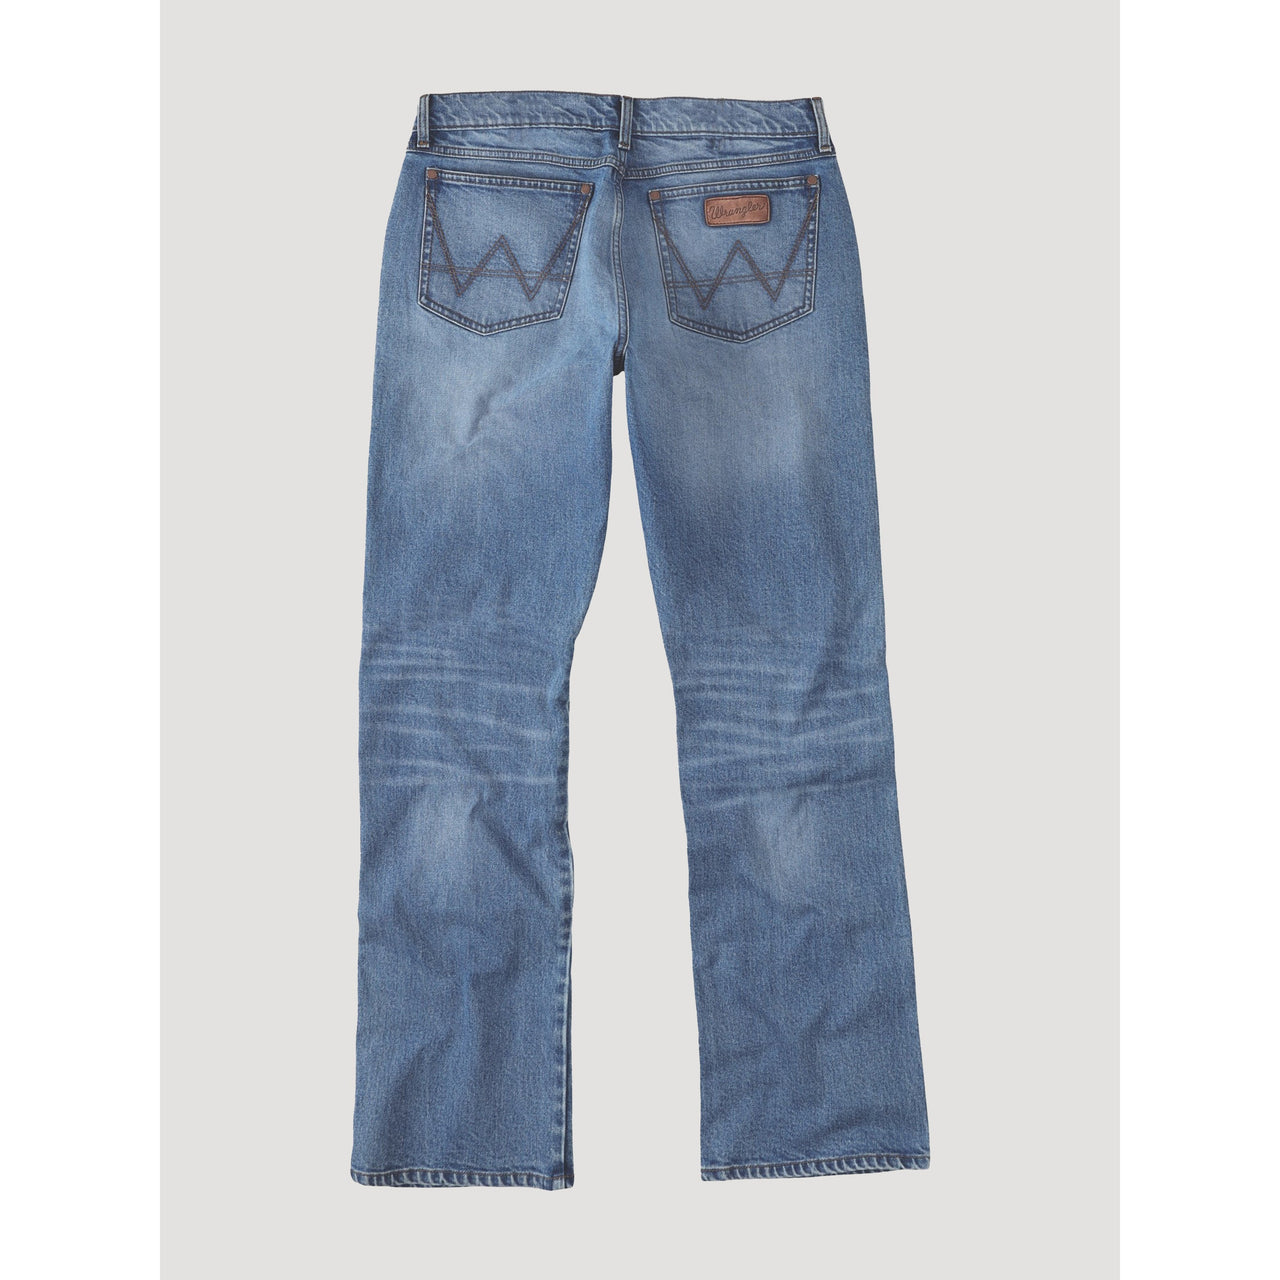 Wrangler Toddler Boy's Retro Relaxed Boot Cut Jeans - Arlyn